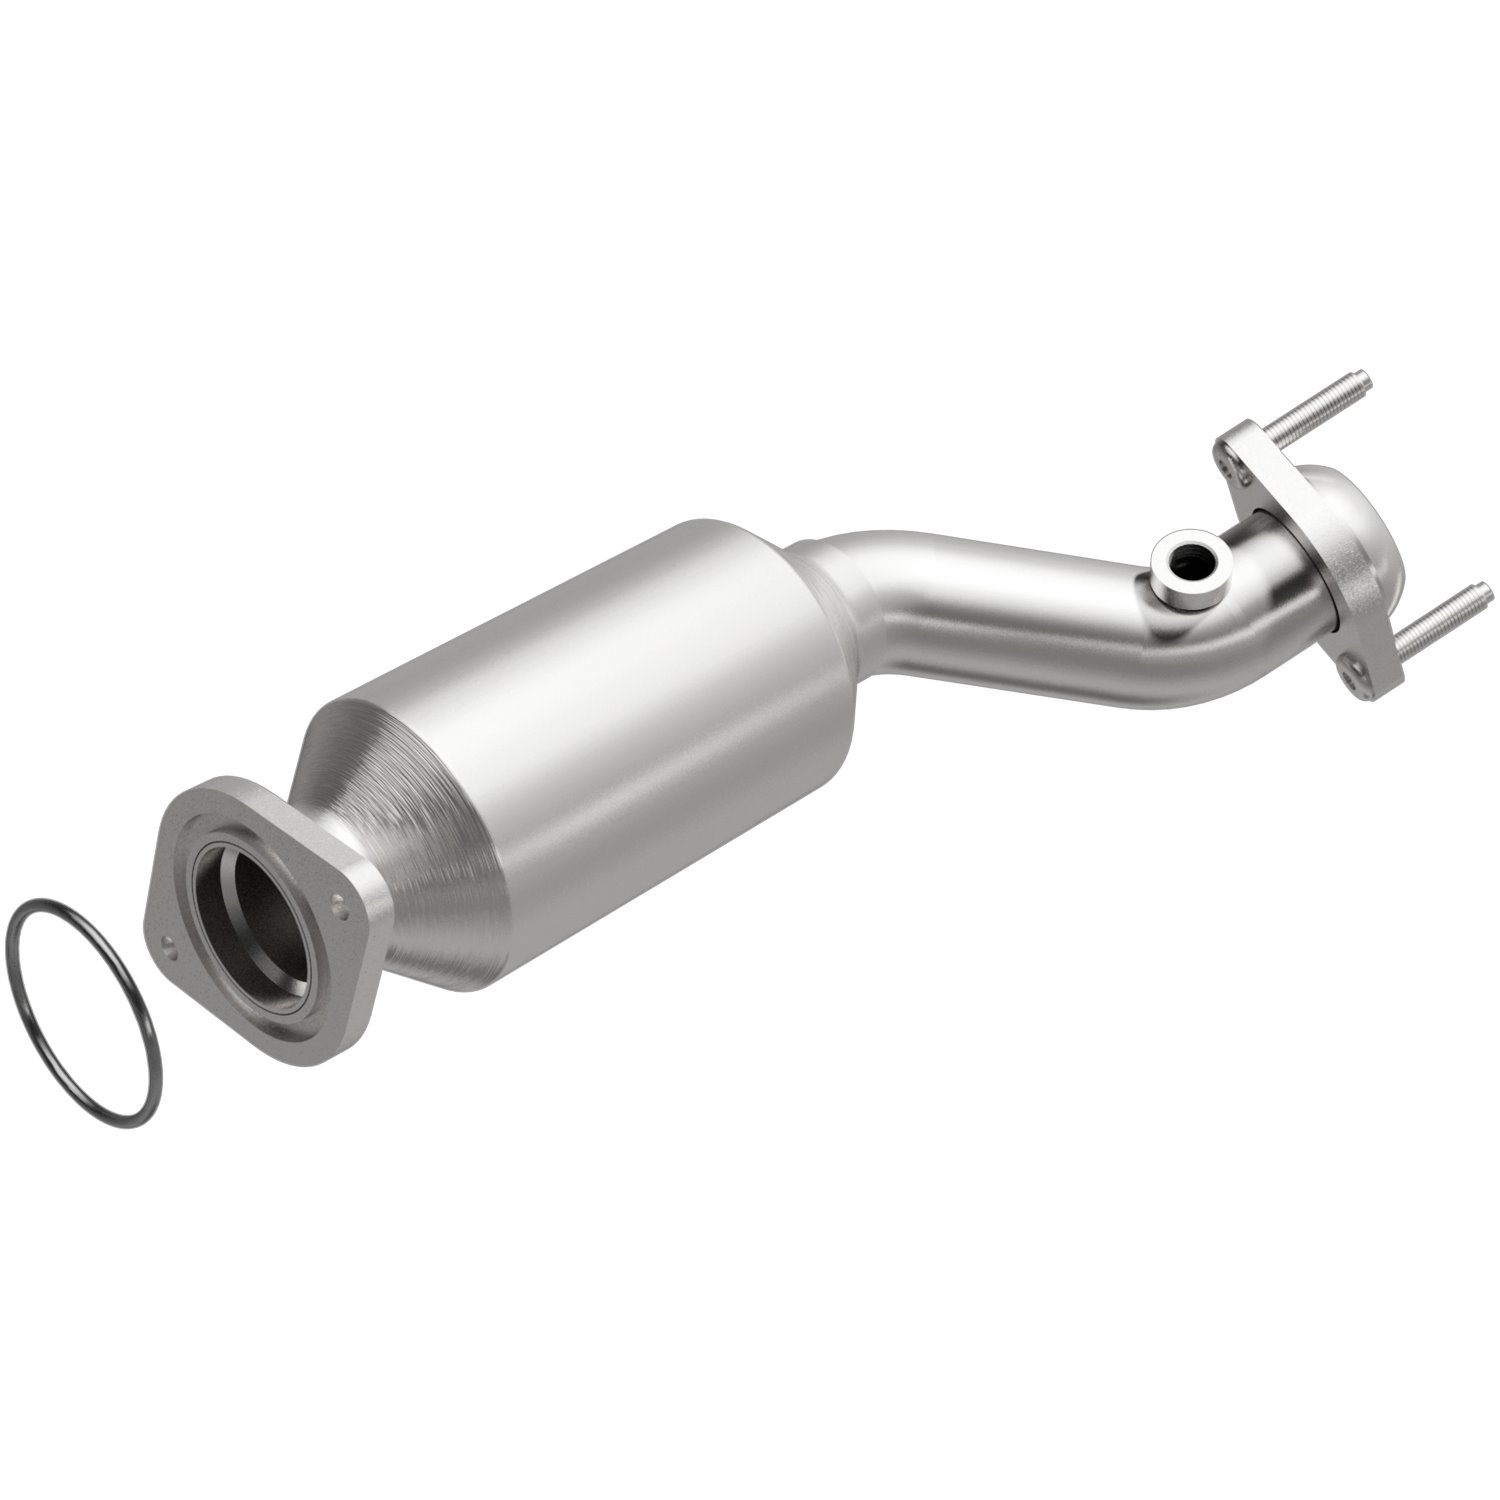 OEM Grade Federal / EPA Compliant Direct-Fit Catalytic Converter 21-916